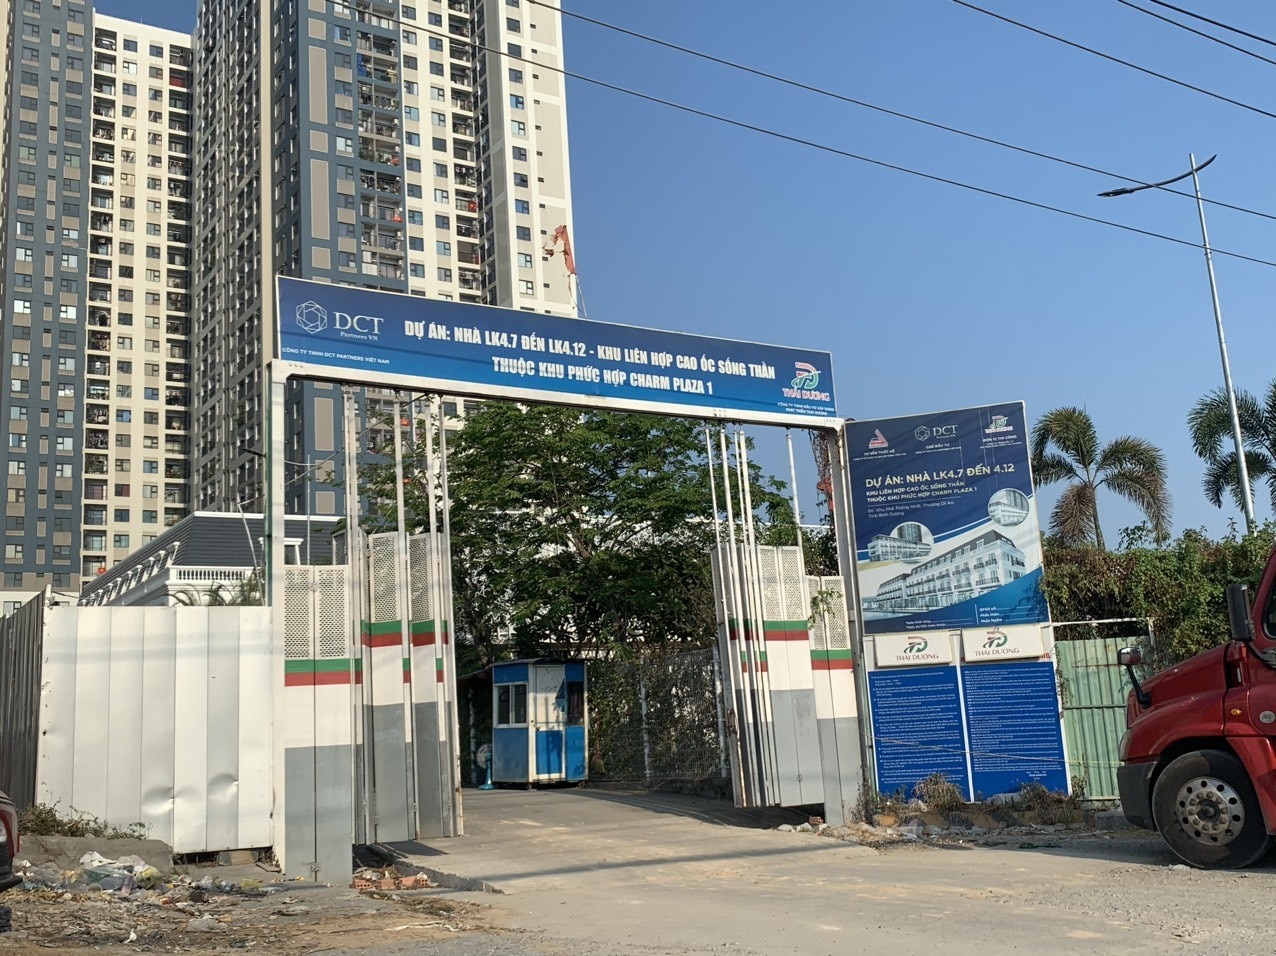 Real estate - Binh Duong Department of Construction provides information on many real estate projects (Figure 2).